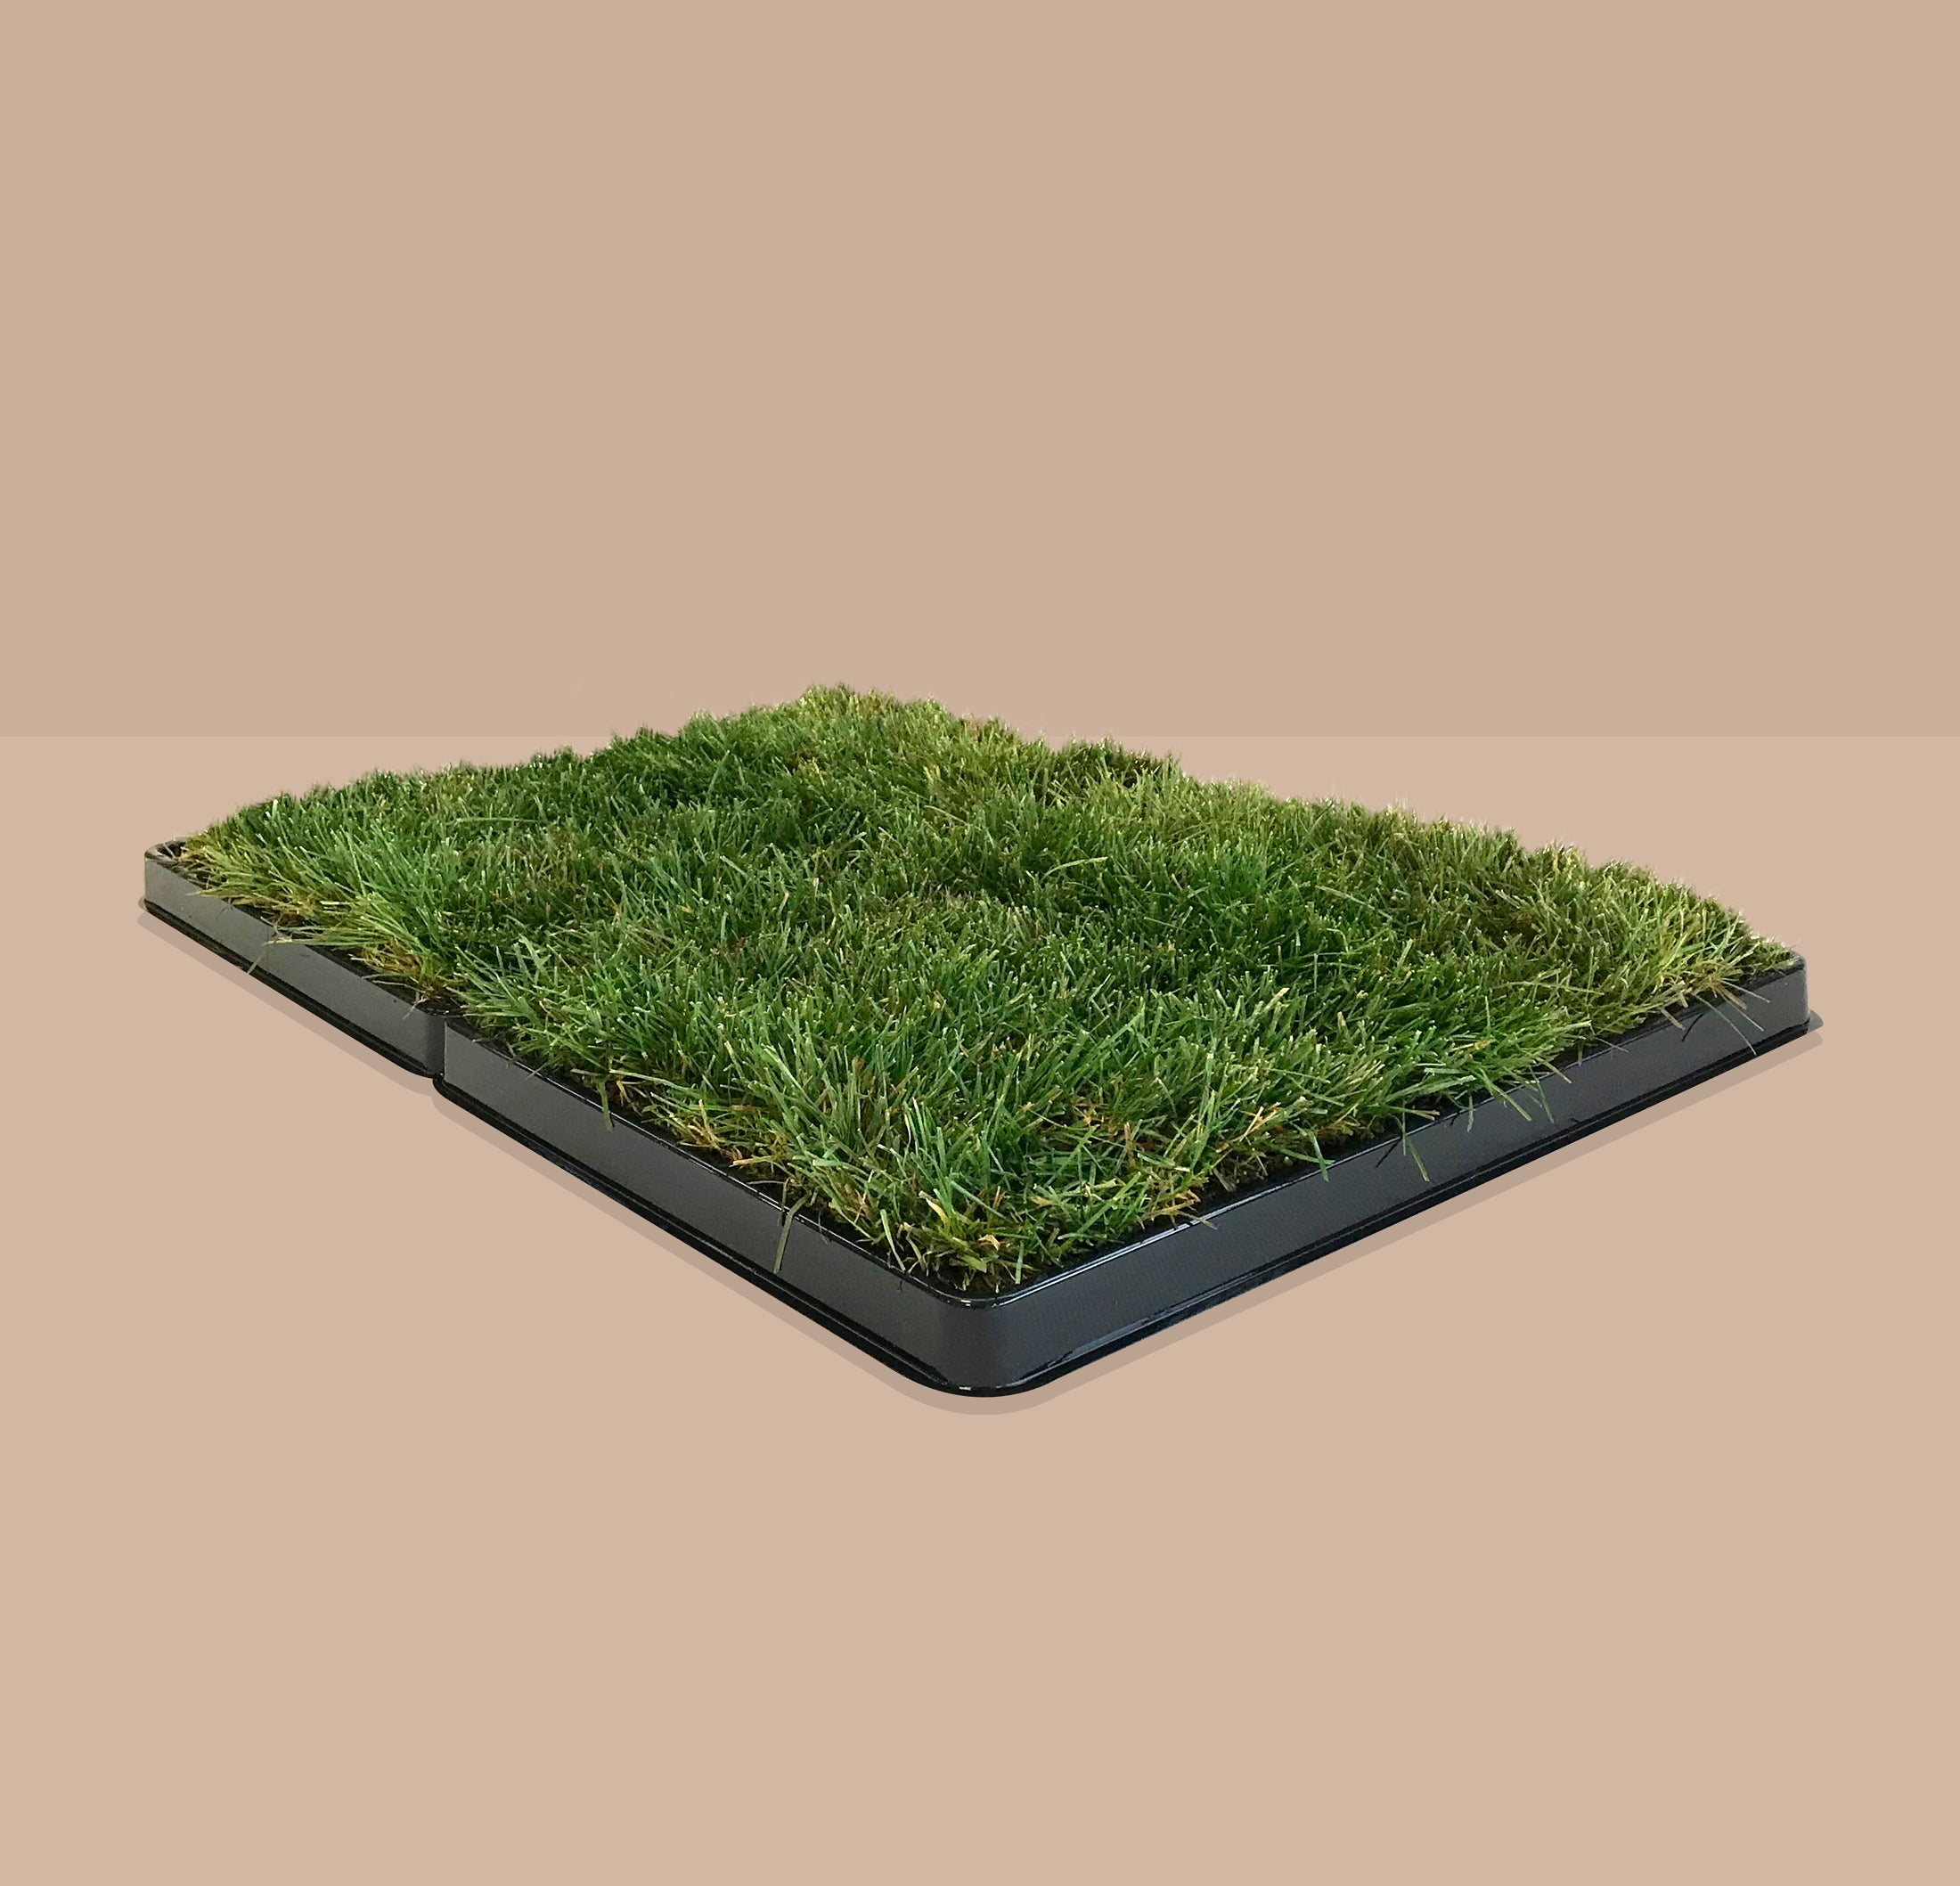 pee pads,potty pads,best artificial grass for dogs, poopeepotty, poopee potty, poo pee potty